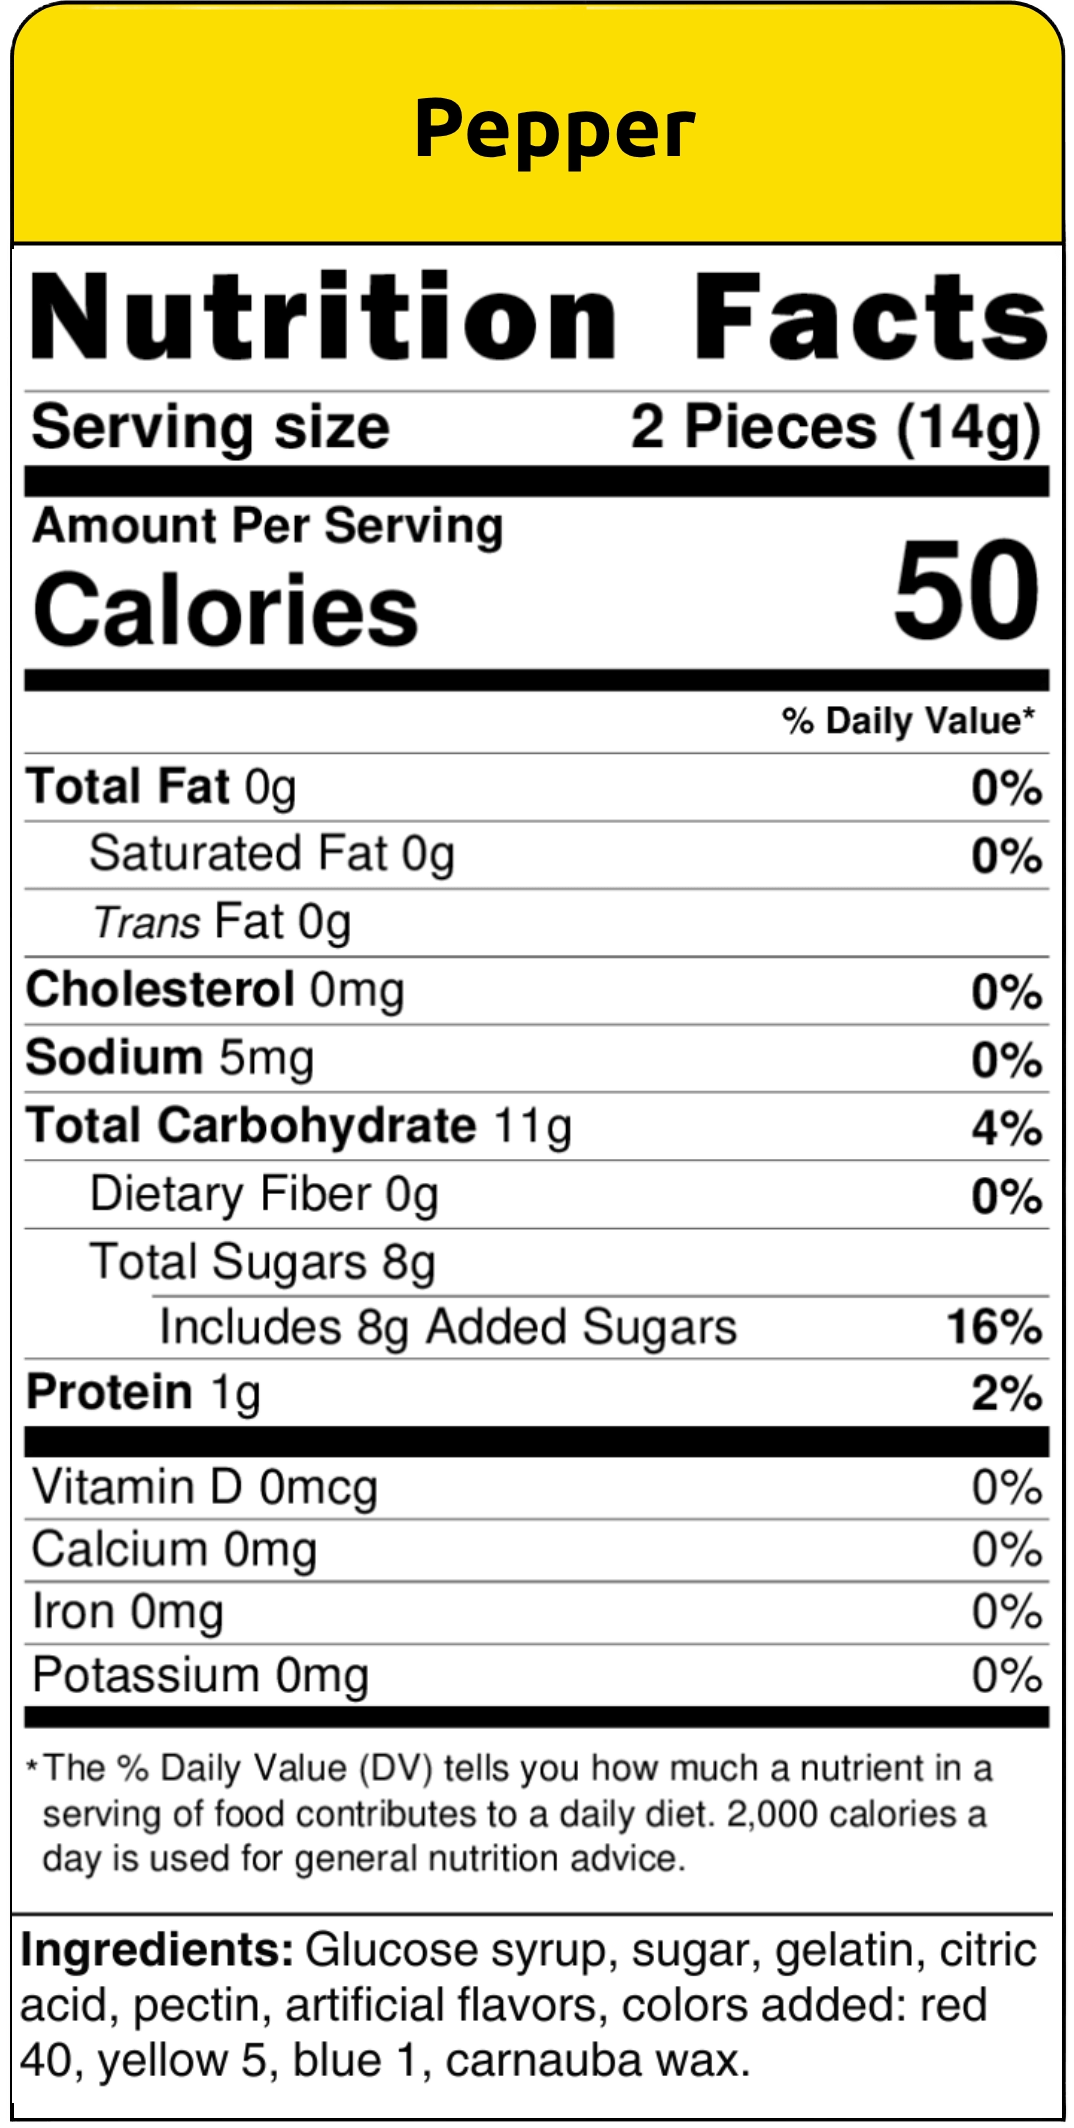 nutritional facts pepper